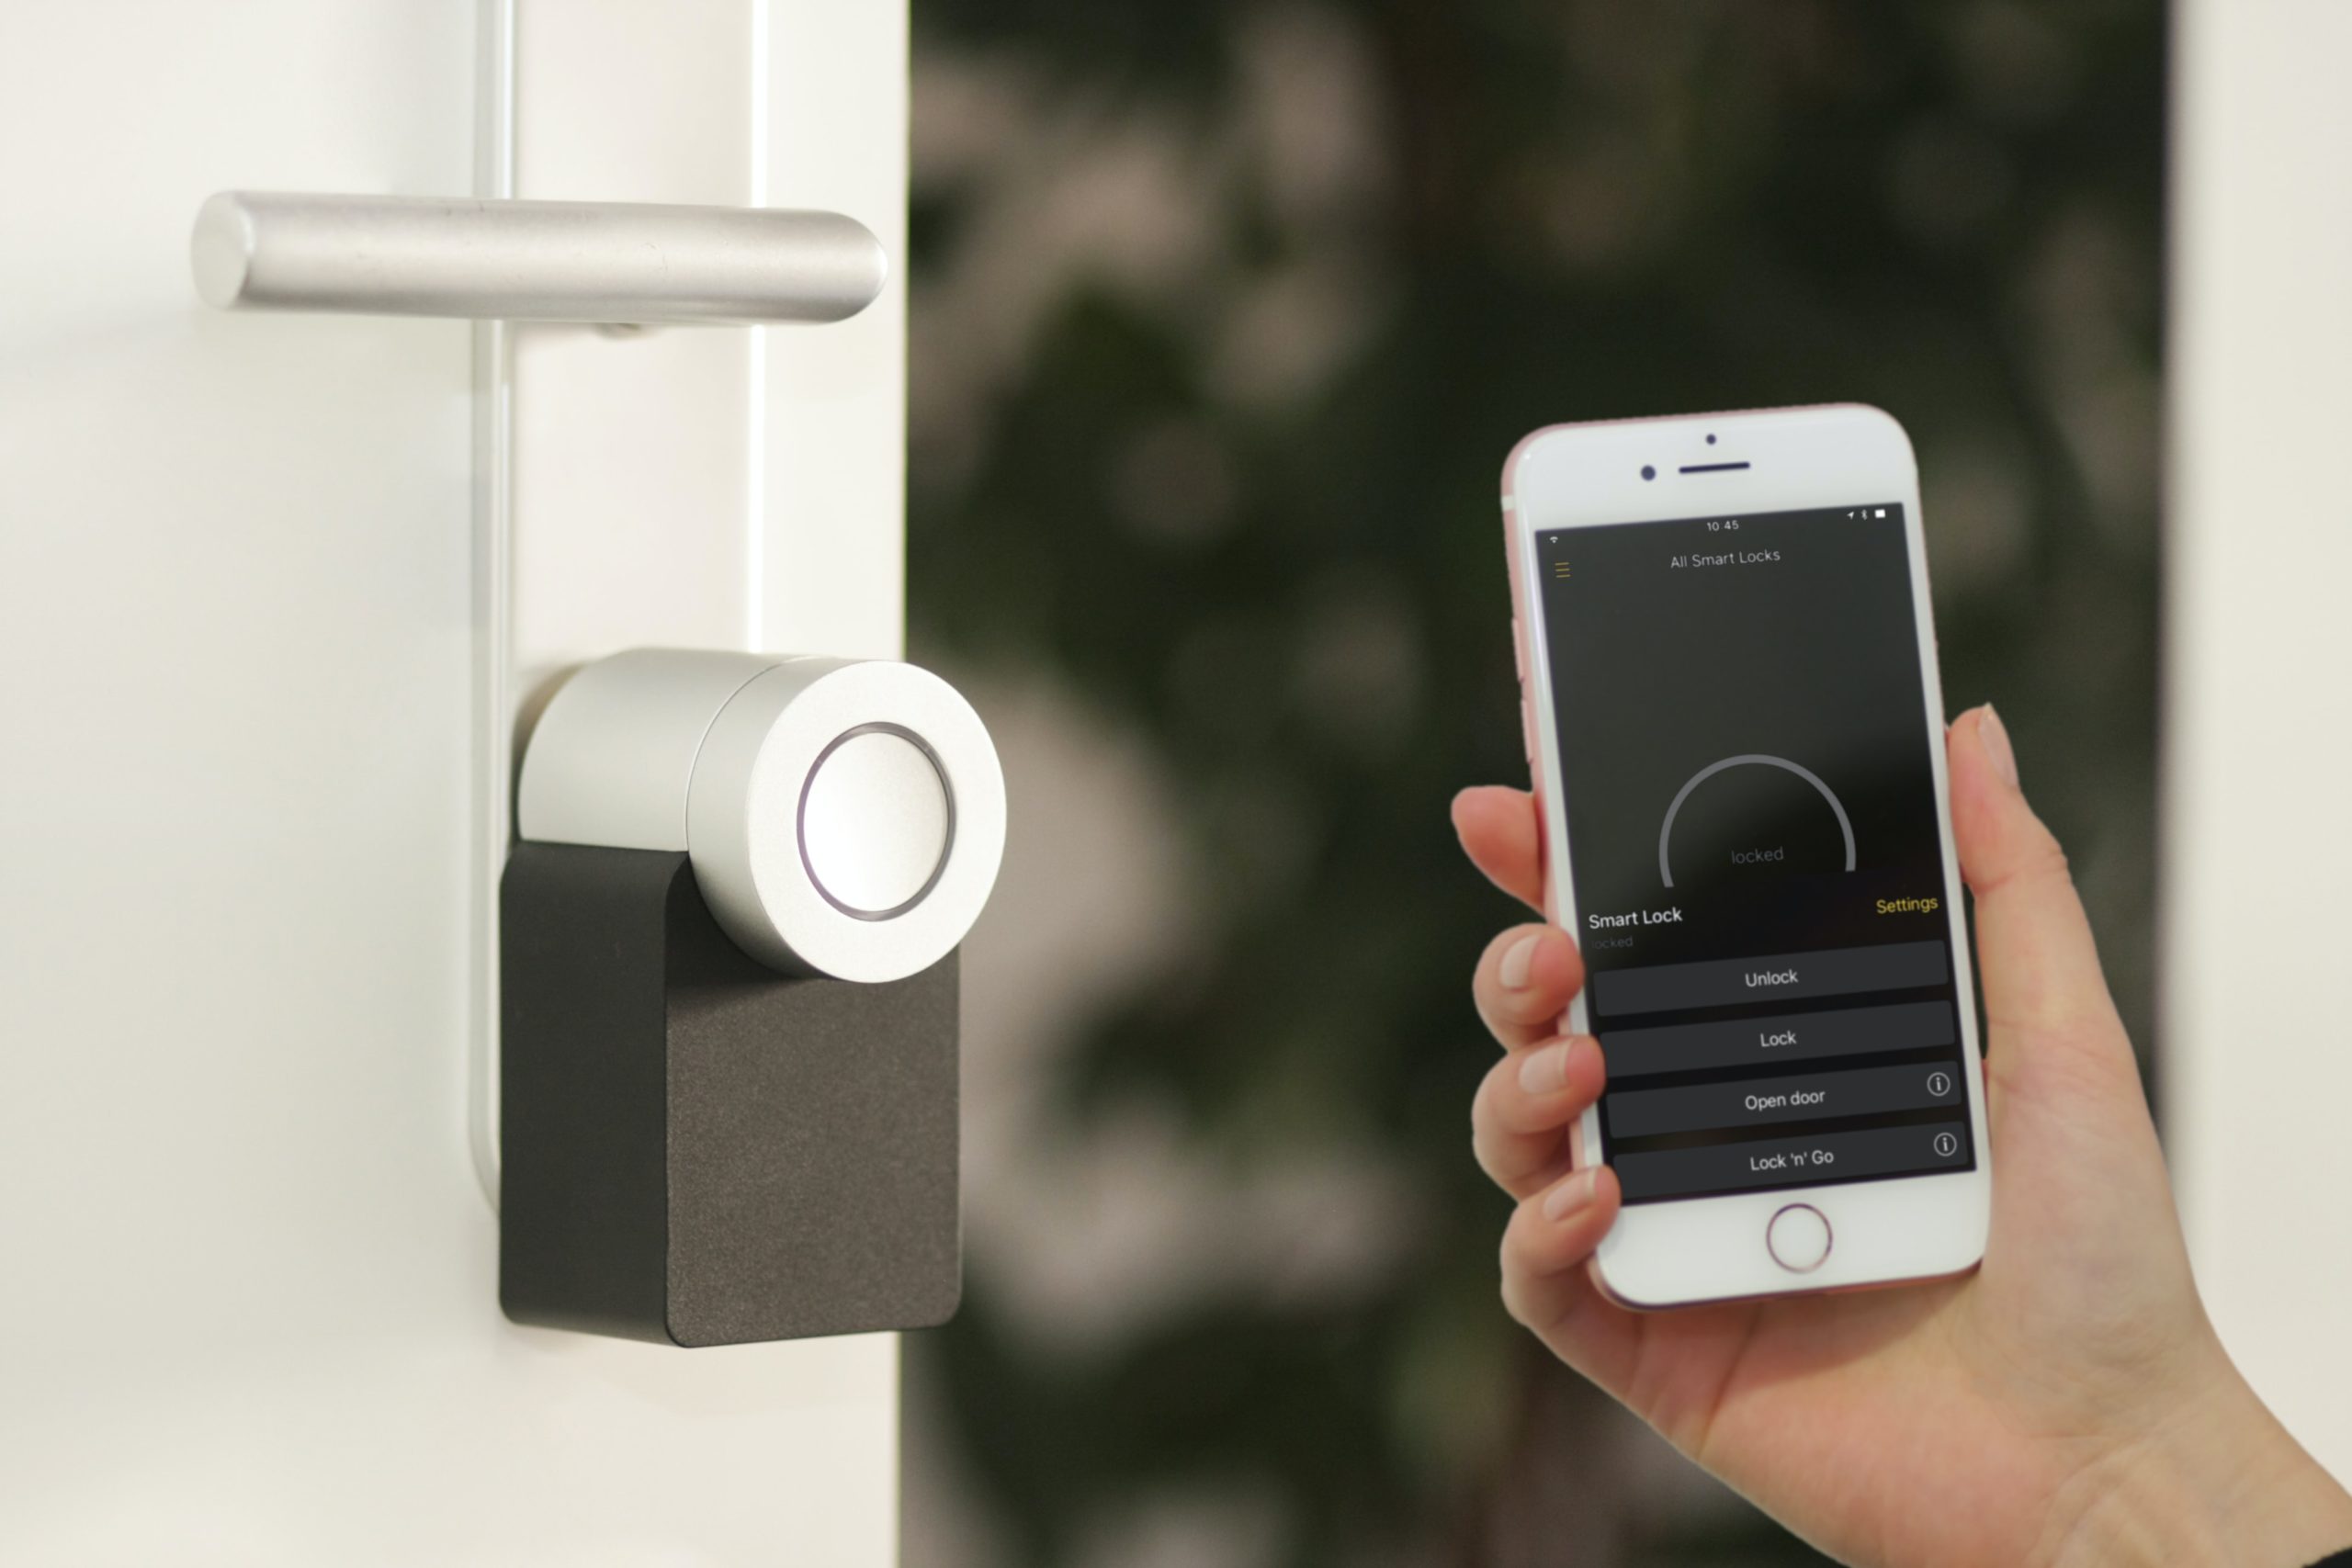 Photograph of a smart lock being operated via a mobile device